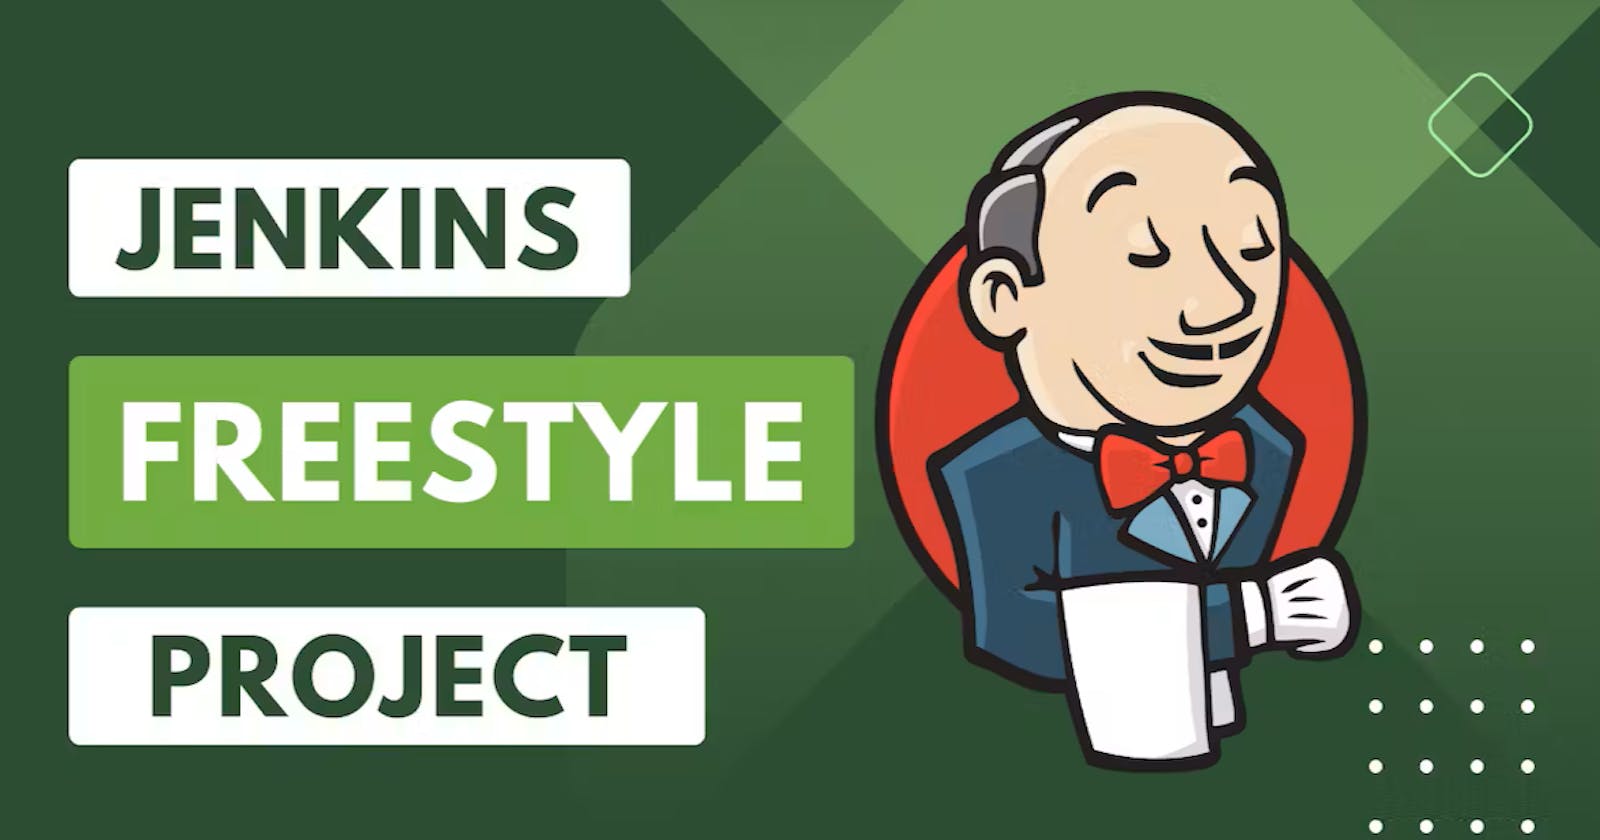 Day 23 - Jenkins Freestyle Project